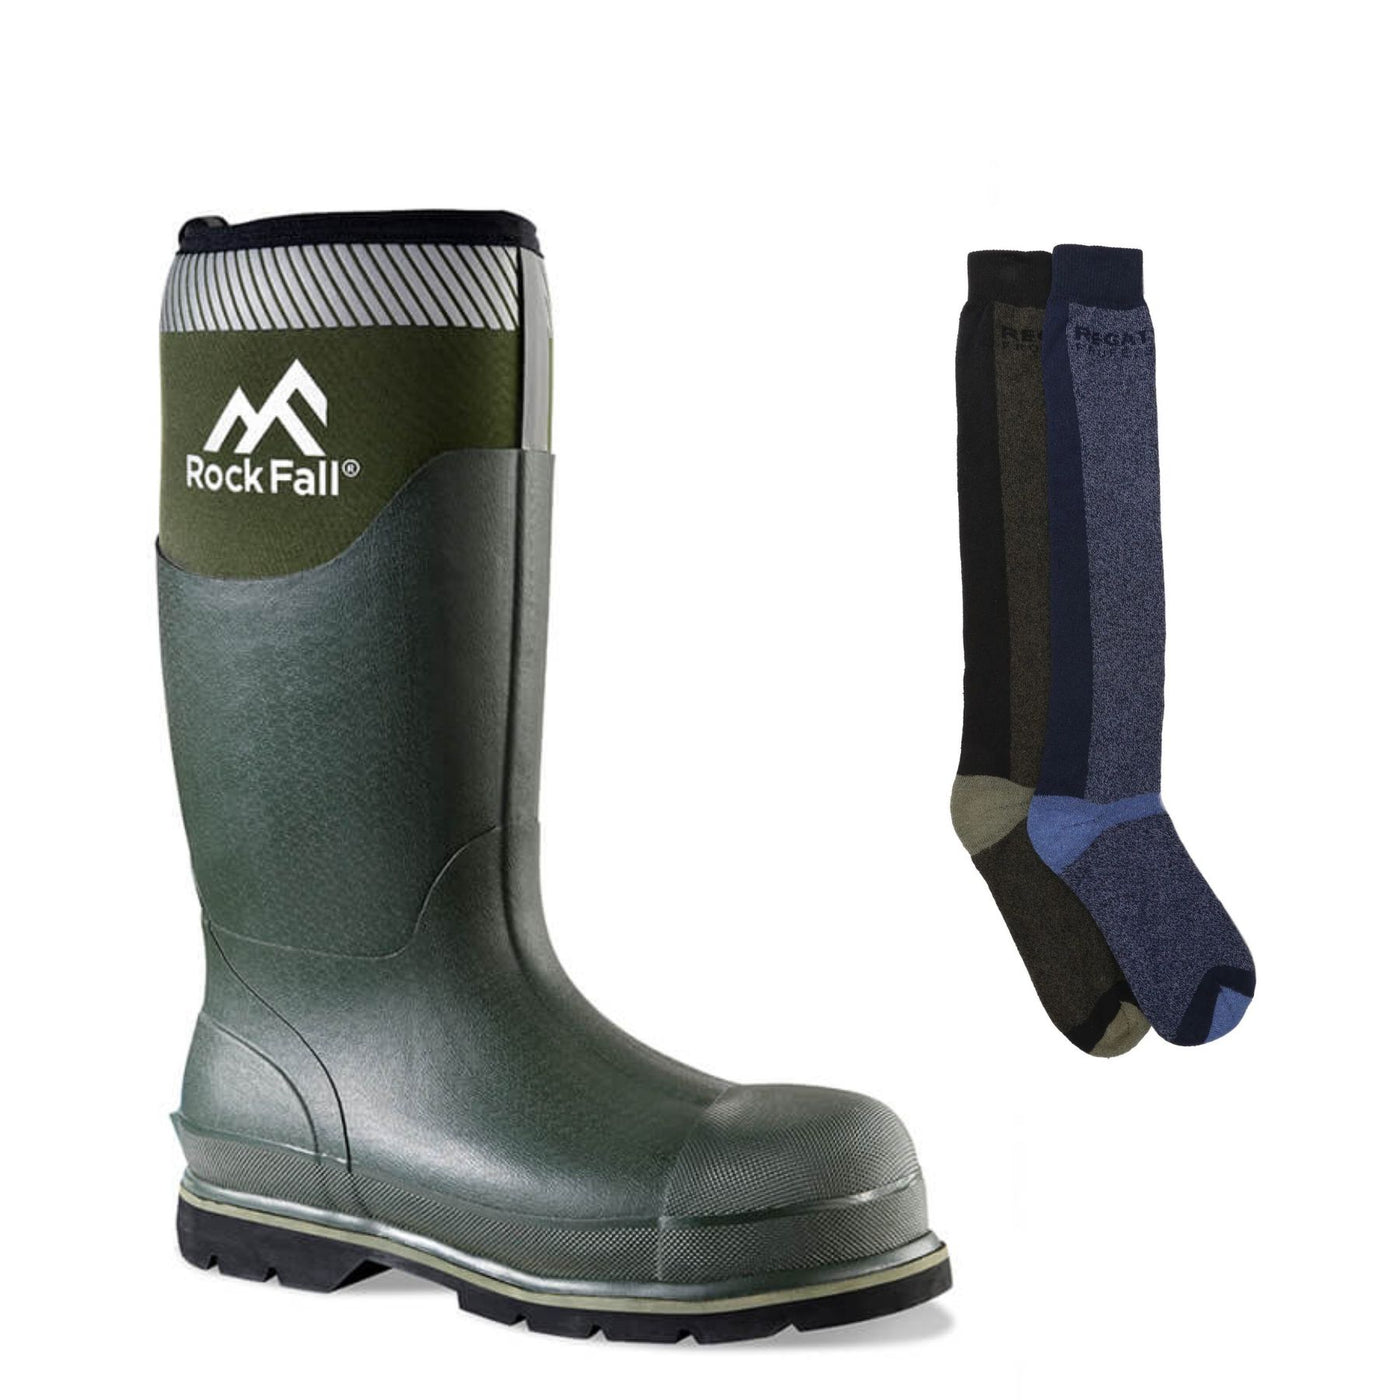 RockFall Meadow Special Offer Pack - RF280 Neoprene Safety Wellies + 2 Pairs Welly Socks